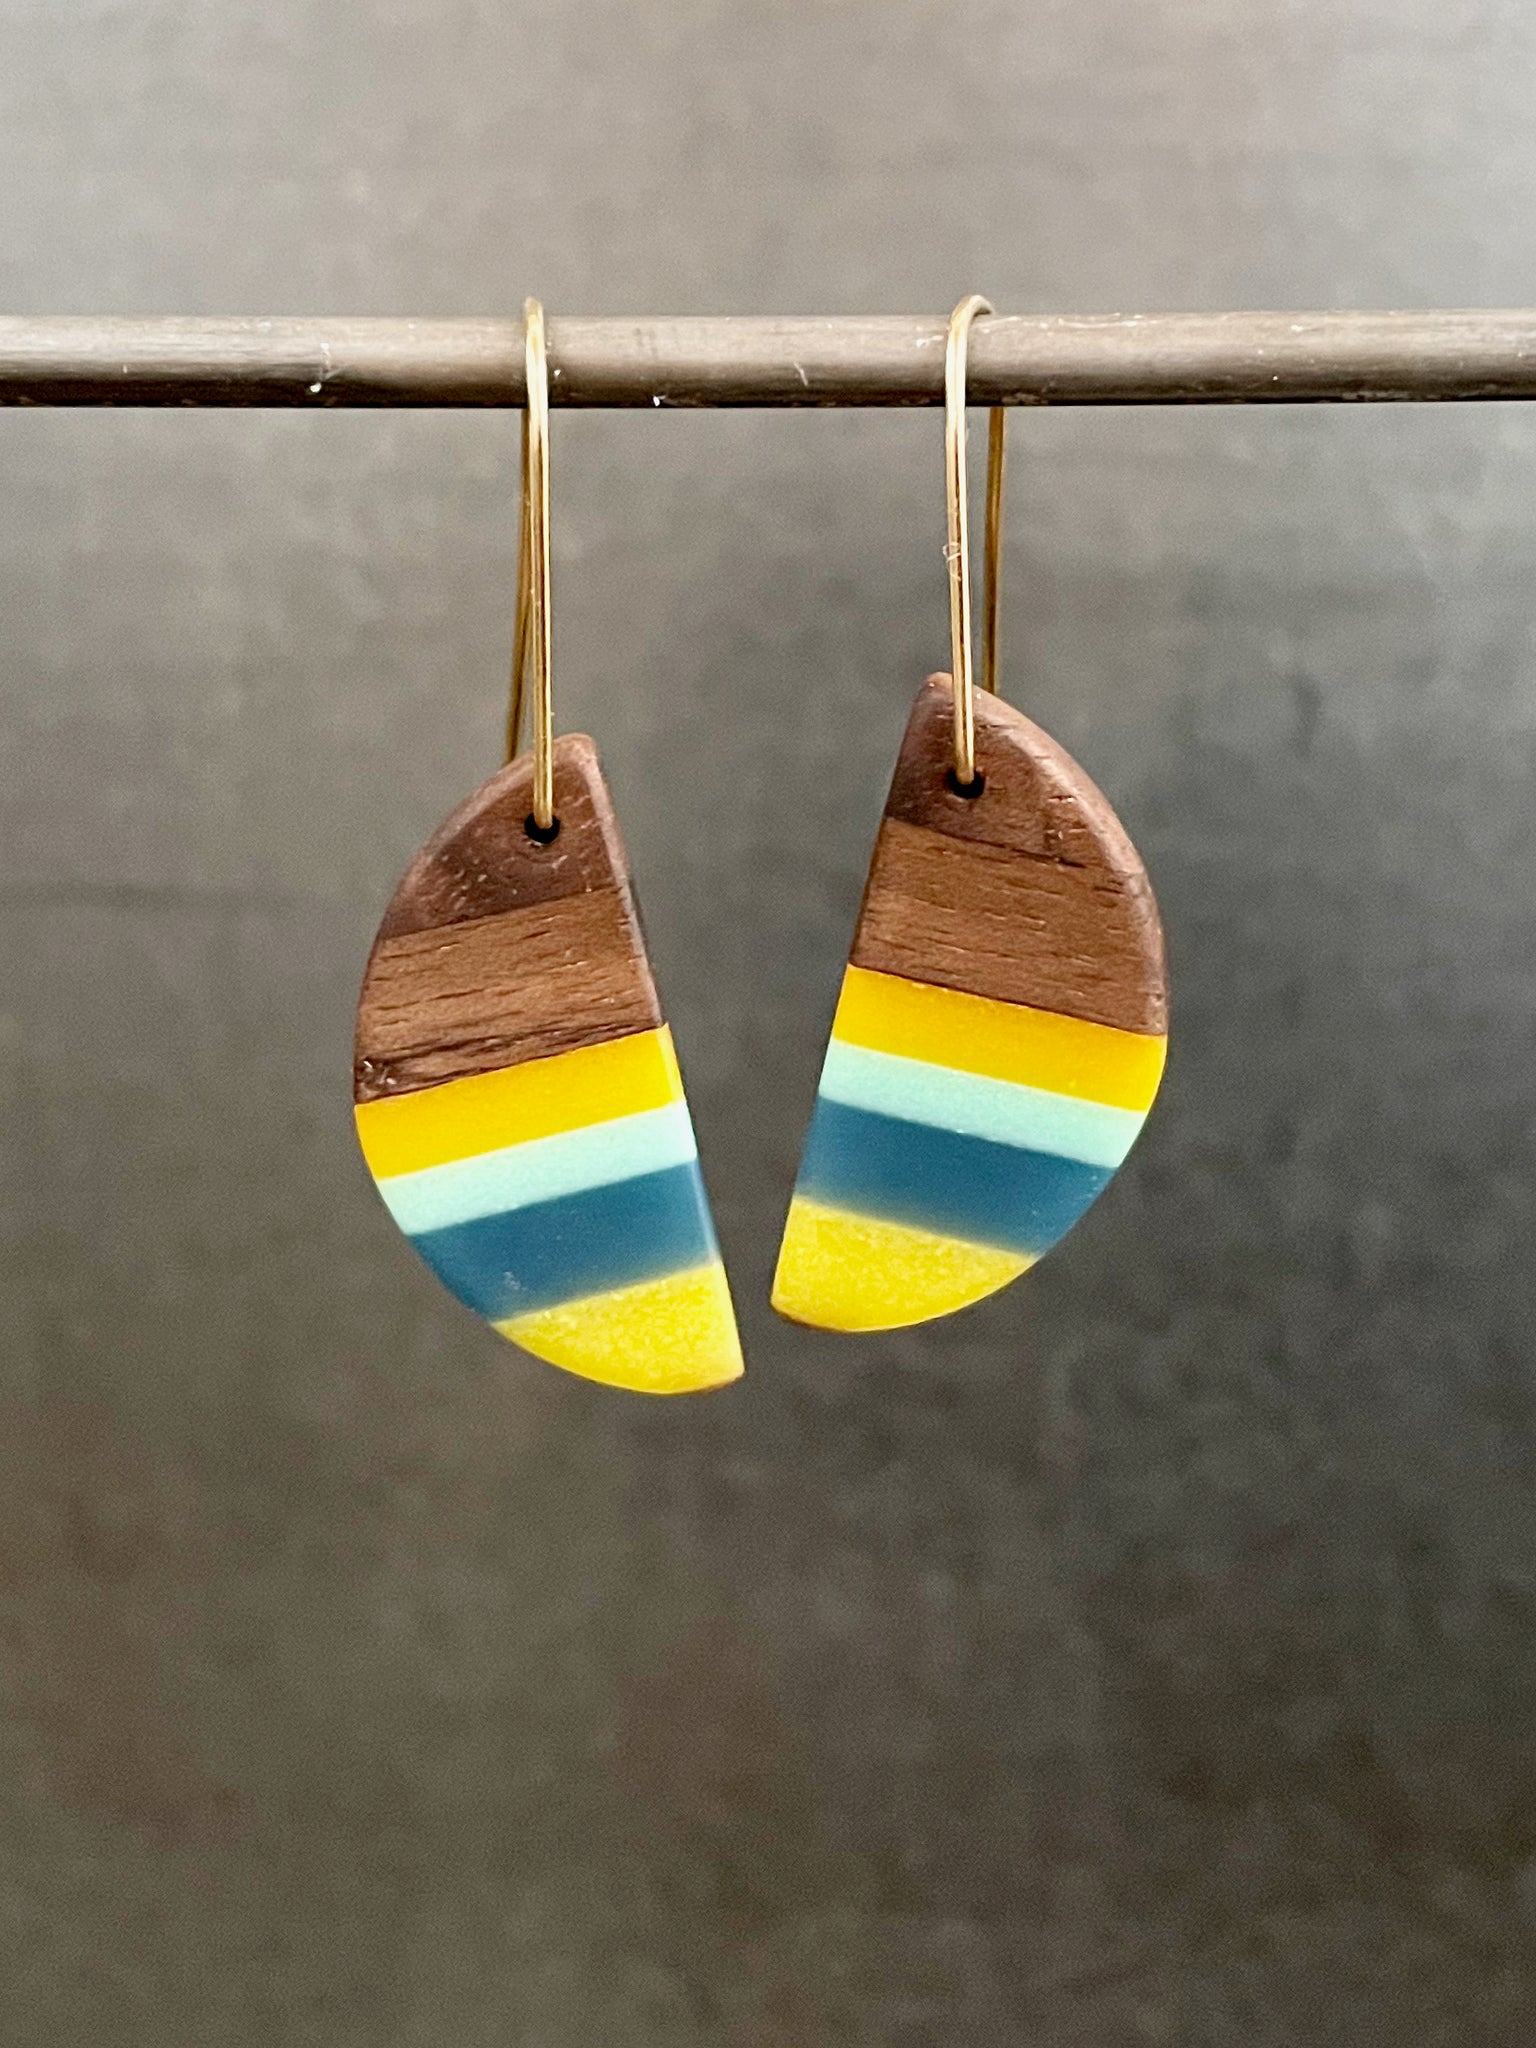 Handmade Wooden Earrings Painted by Hand, Wooden Earrings, Mary Earrings,  Earrings With Silk Thread, Traditional Earrings, Gift for Her. - Etsy